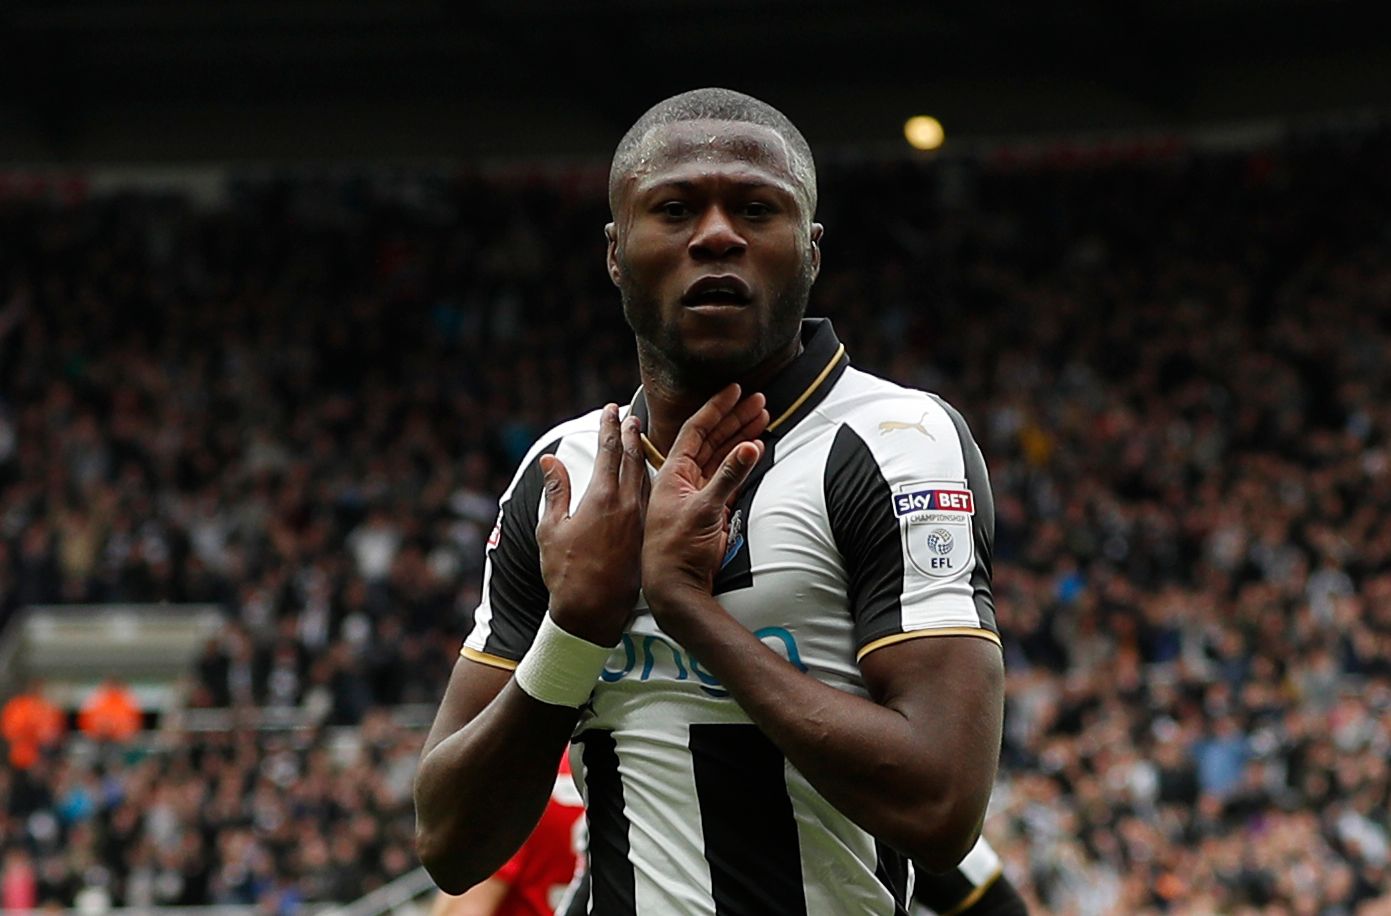 Britain Soccer Football - Newcastle United v Barnsley - Sky Bet Championship - St James' Park - 7/5/17 Newcastle United's Chancel Mbemba celebrates scoring their second goal  Mandatory Credit: Action Images / Lee Smith Livepic EDITORIAL USE ONLY. No use with unauthorized audio, video, data, fixture lists, club/league logos or 